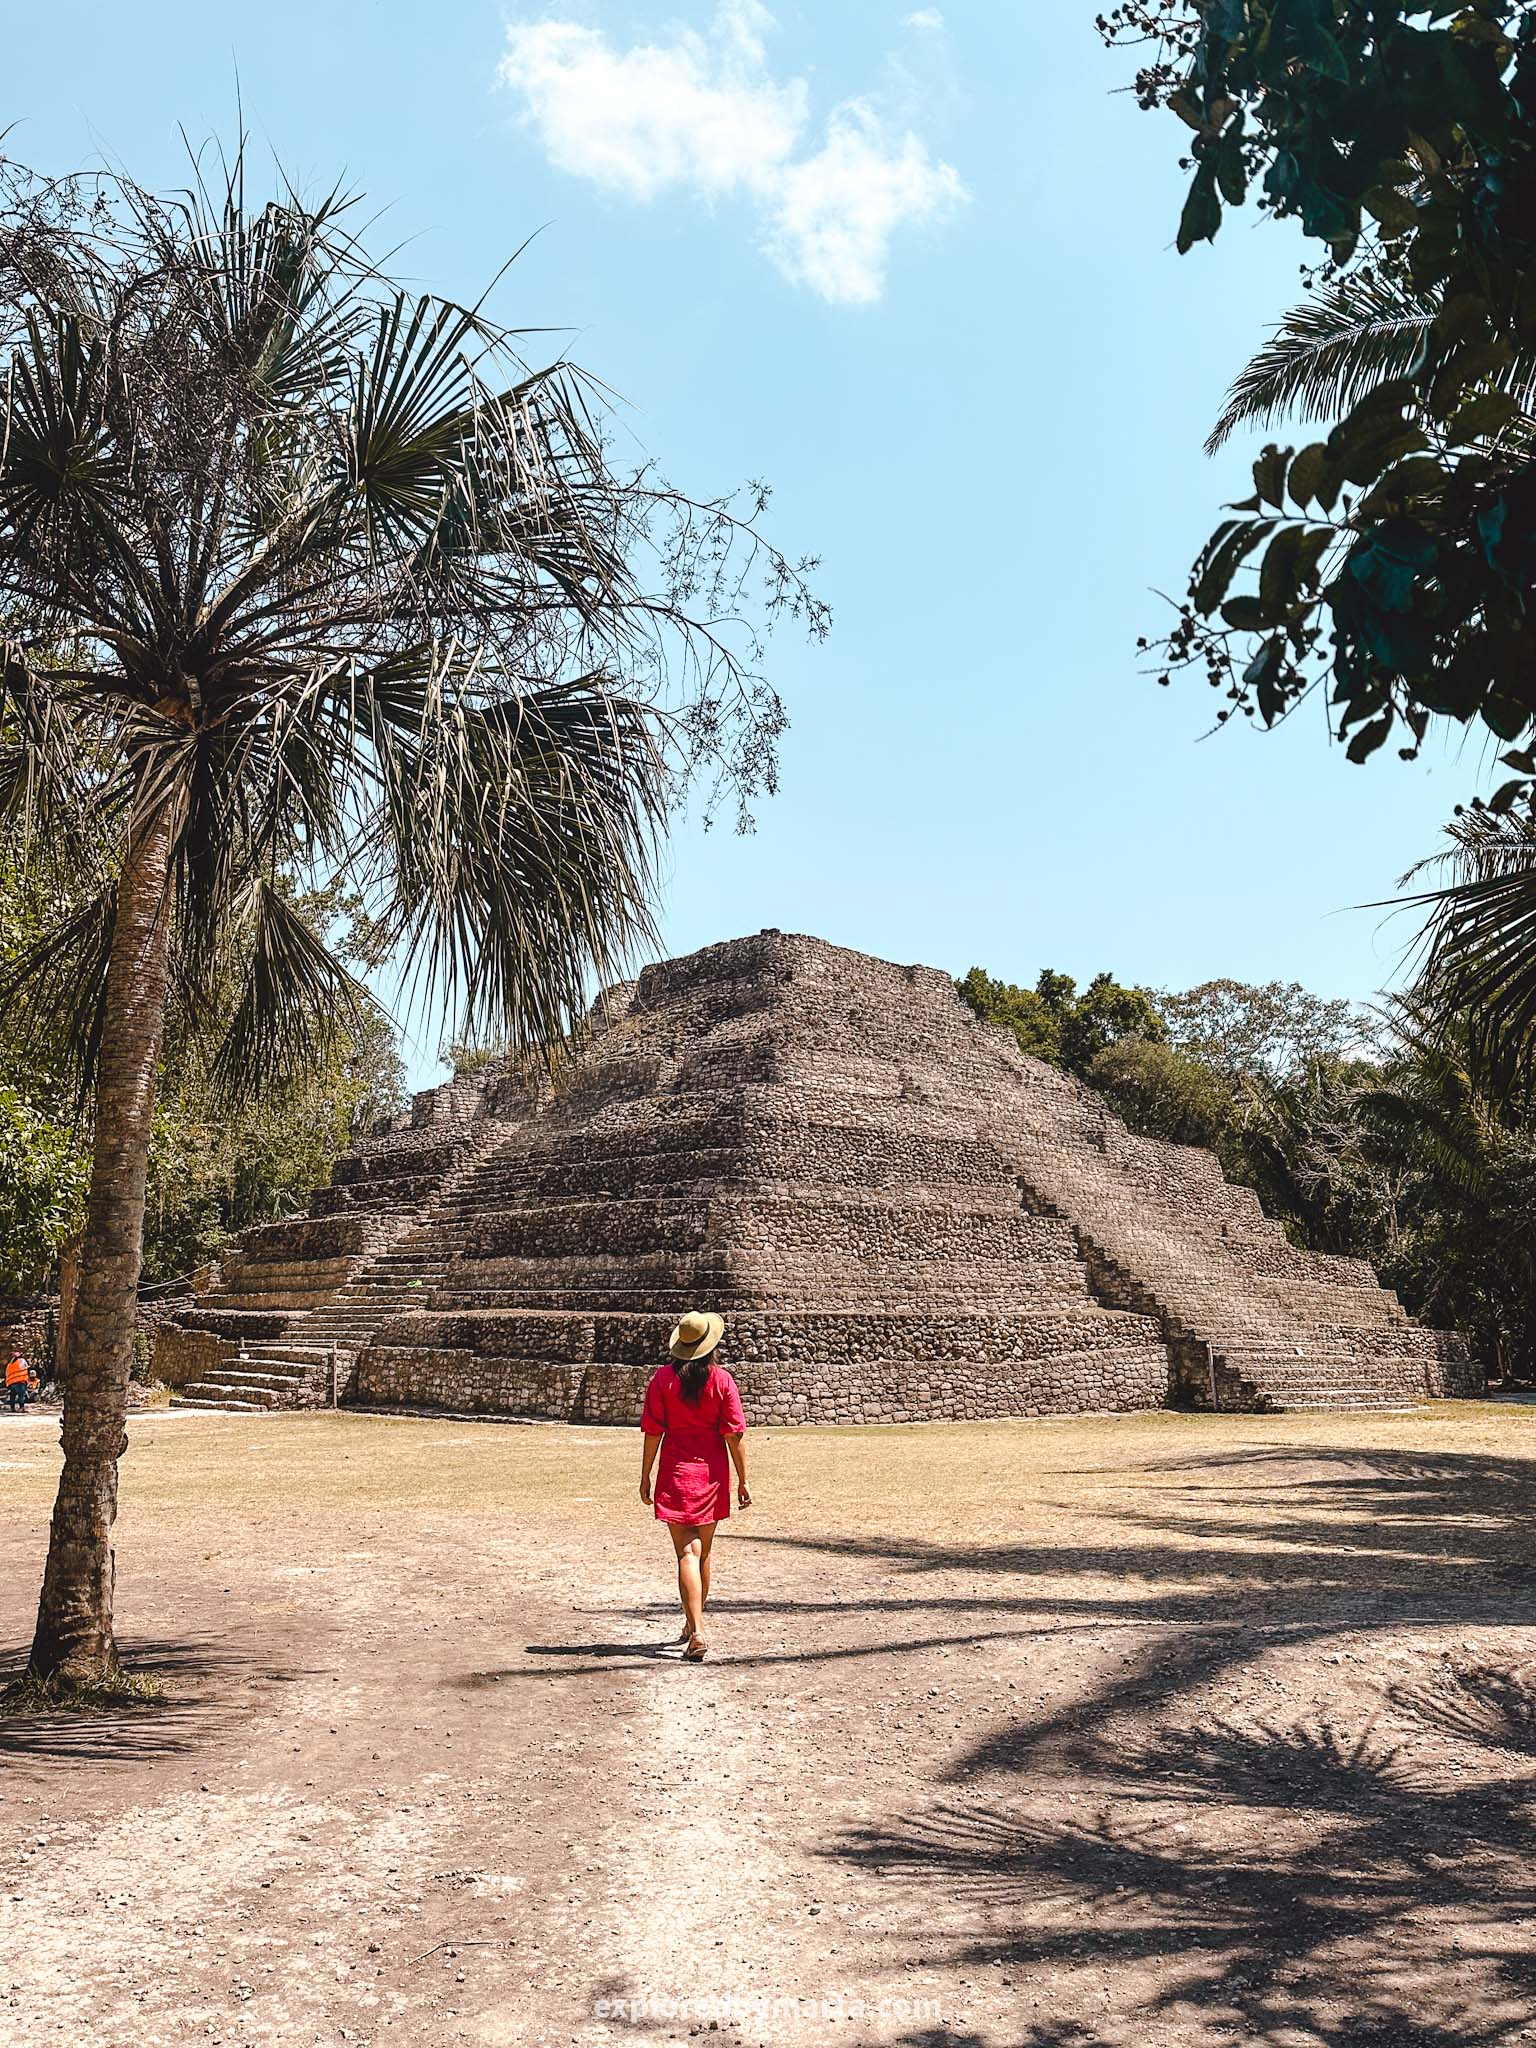 Chacchoben Archaeological Zone in Mexico